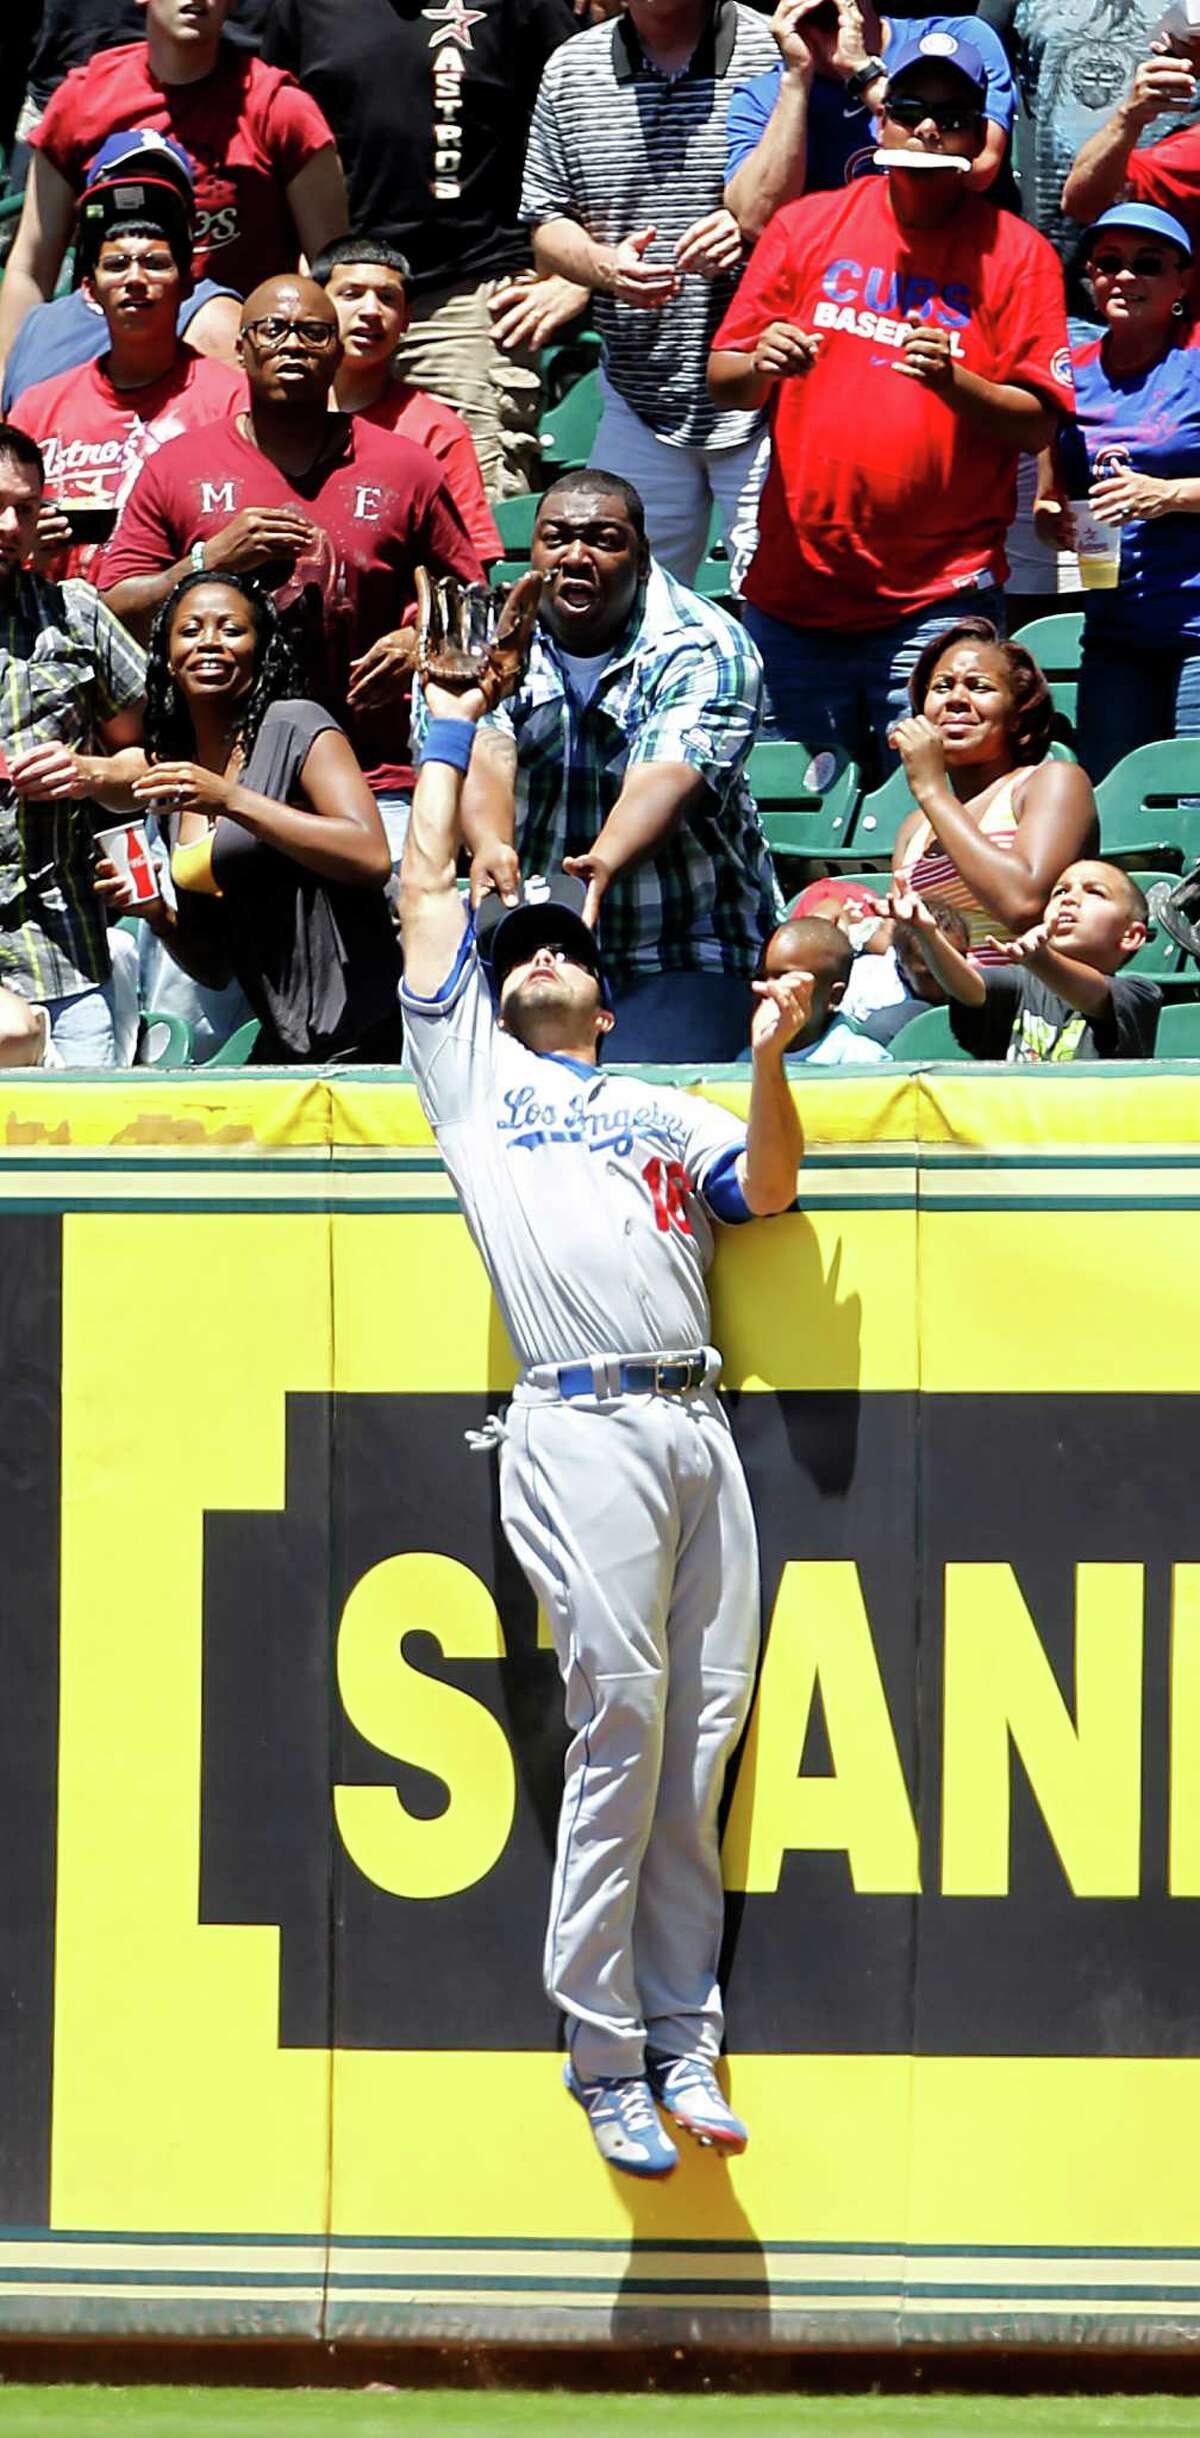 Los Angeles Dodger's Andre Ethier (16) tries in vain to catch a grand slam home run ball hit by Houston Astros center fielder Jordan Schafer (1) during the 2nd inning of an MLB baseball game at Minute Maid Park,Sunday, April 22, 2012, in Houston.